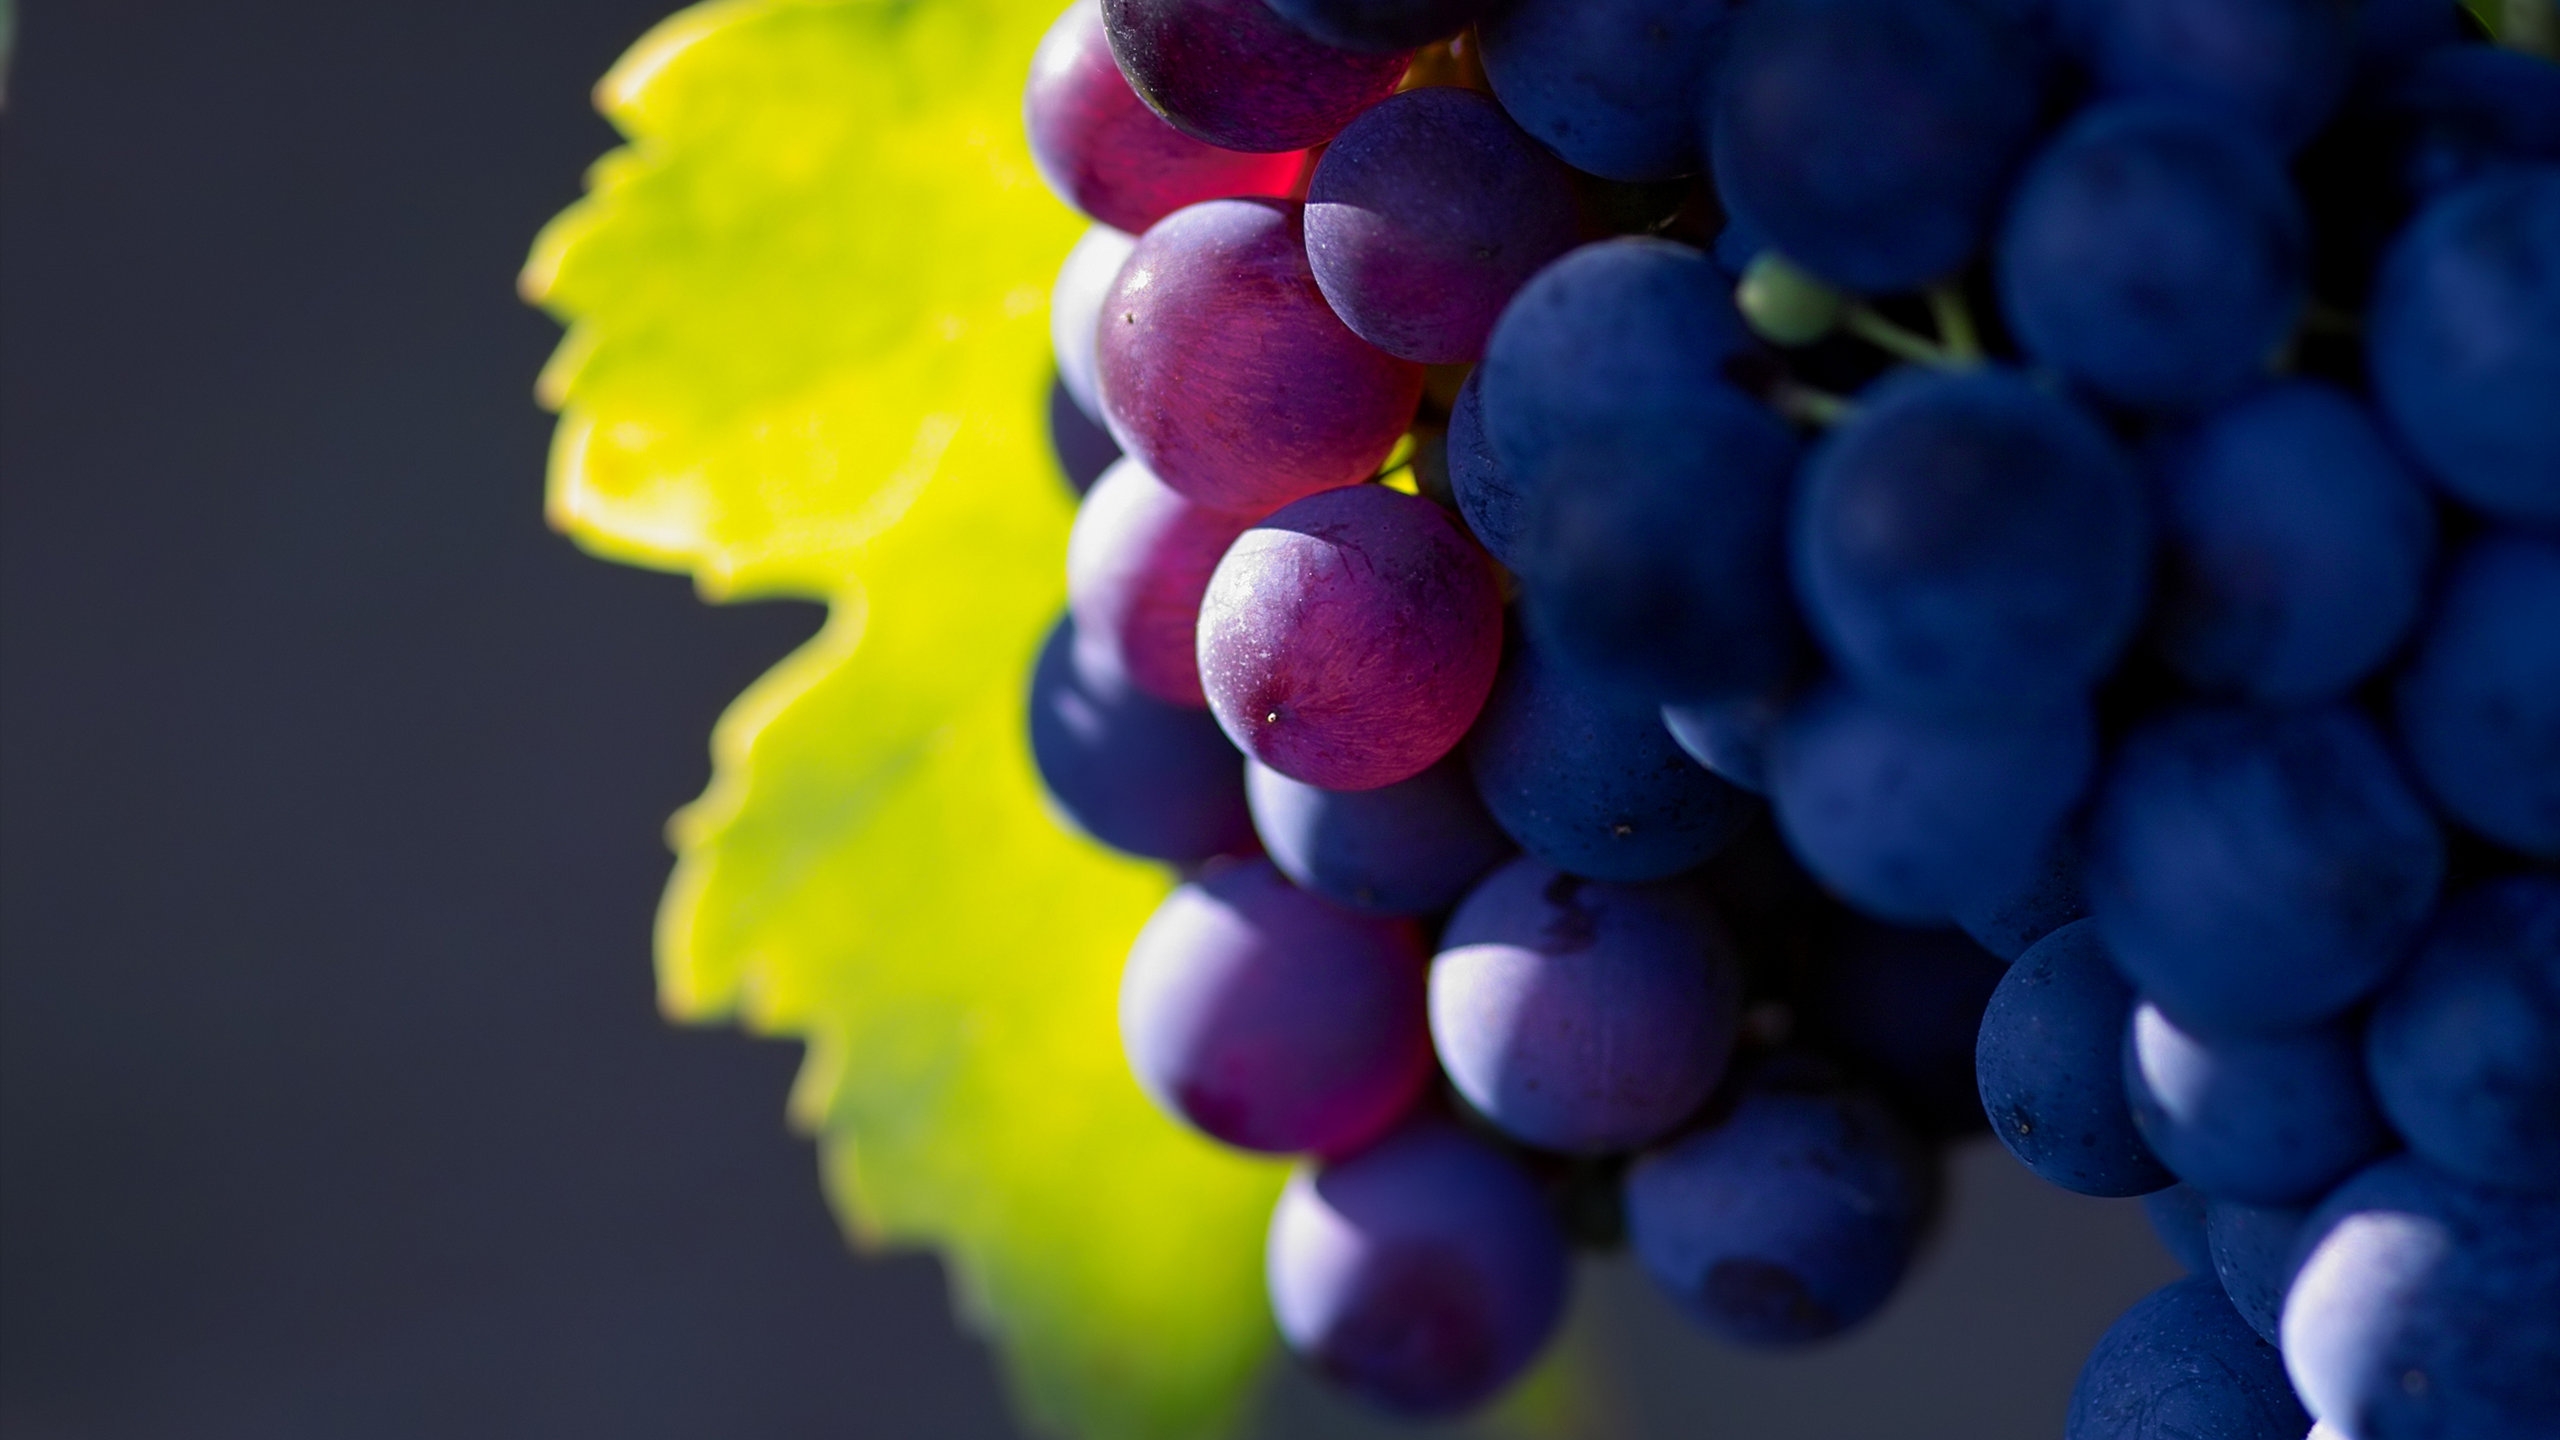 Bunch of Grapes for 2560x1440 HDTV resolution